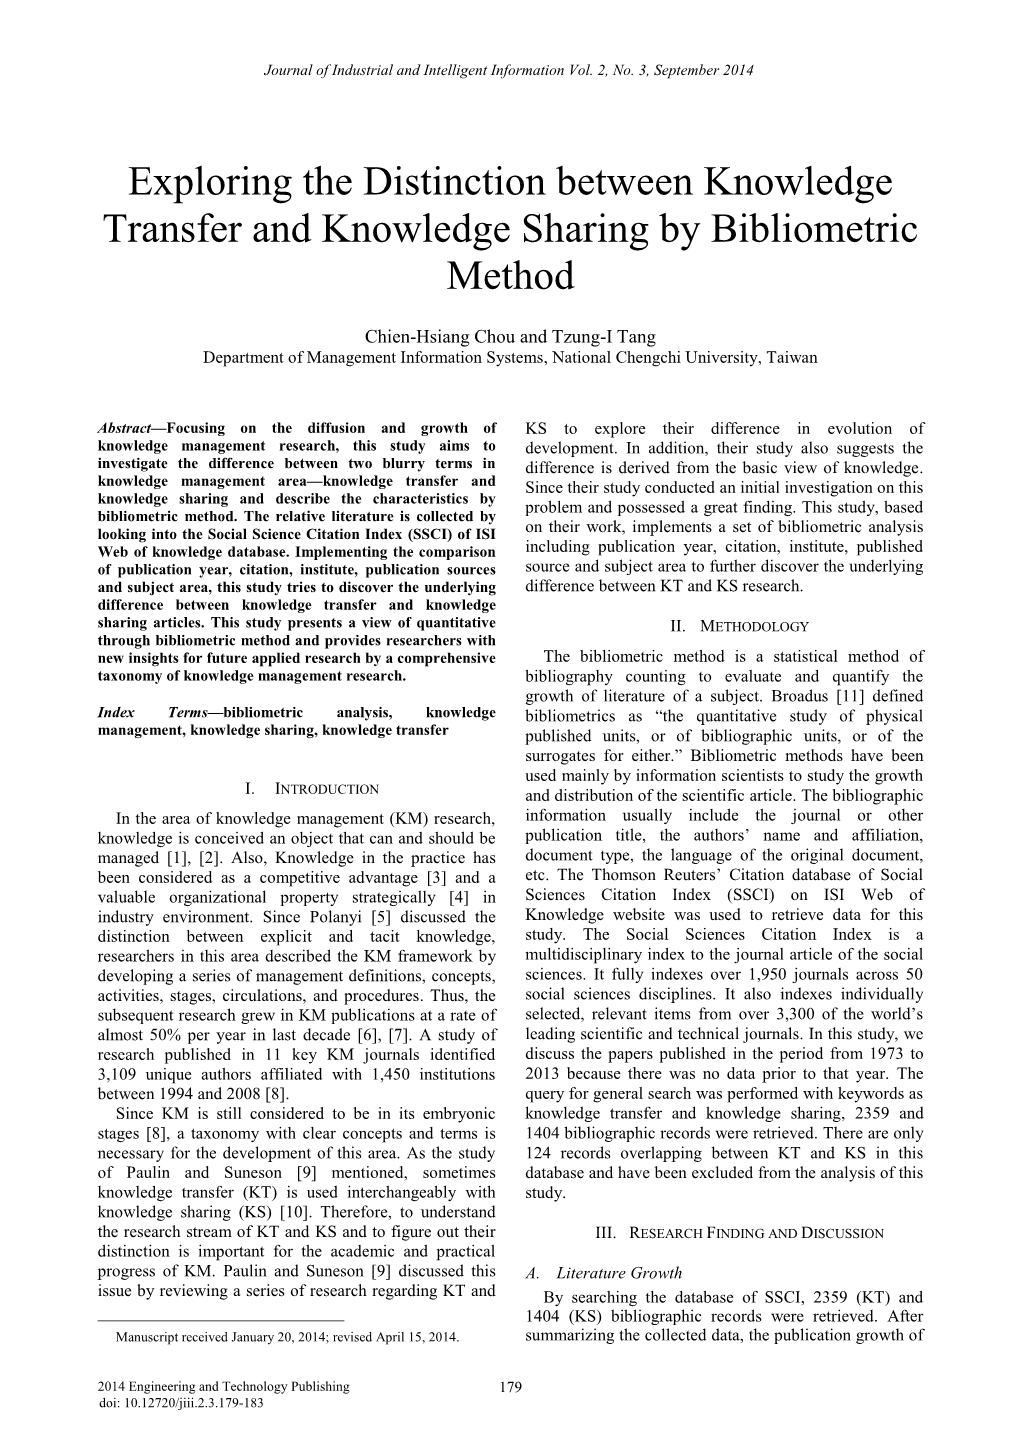 Exploring the Distinction Between Knowledge Transfer and Knowledge Sharing by Bibliometric Method